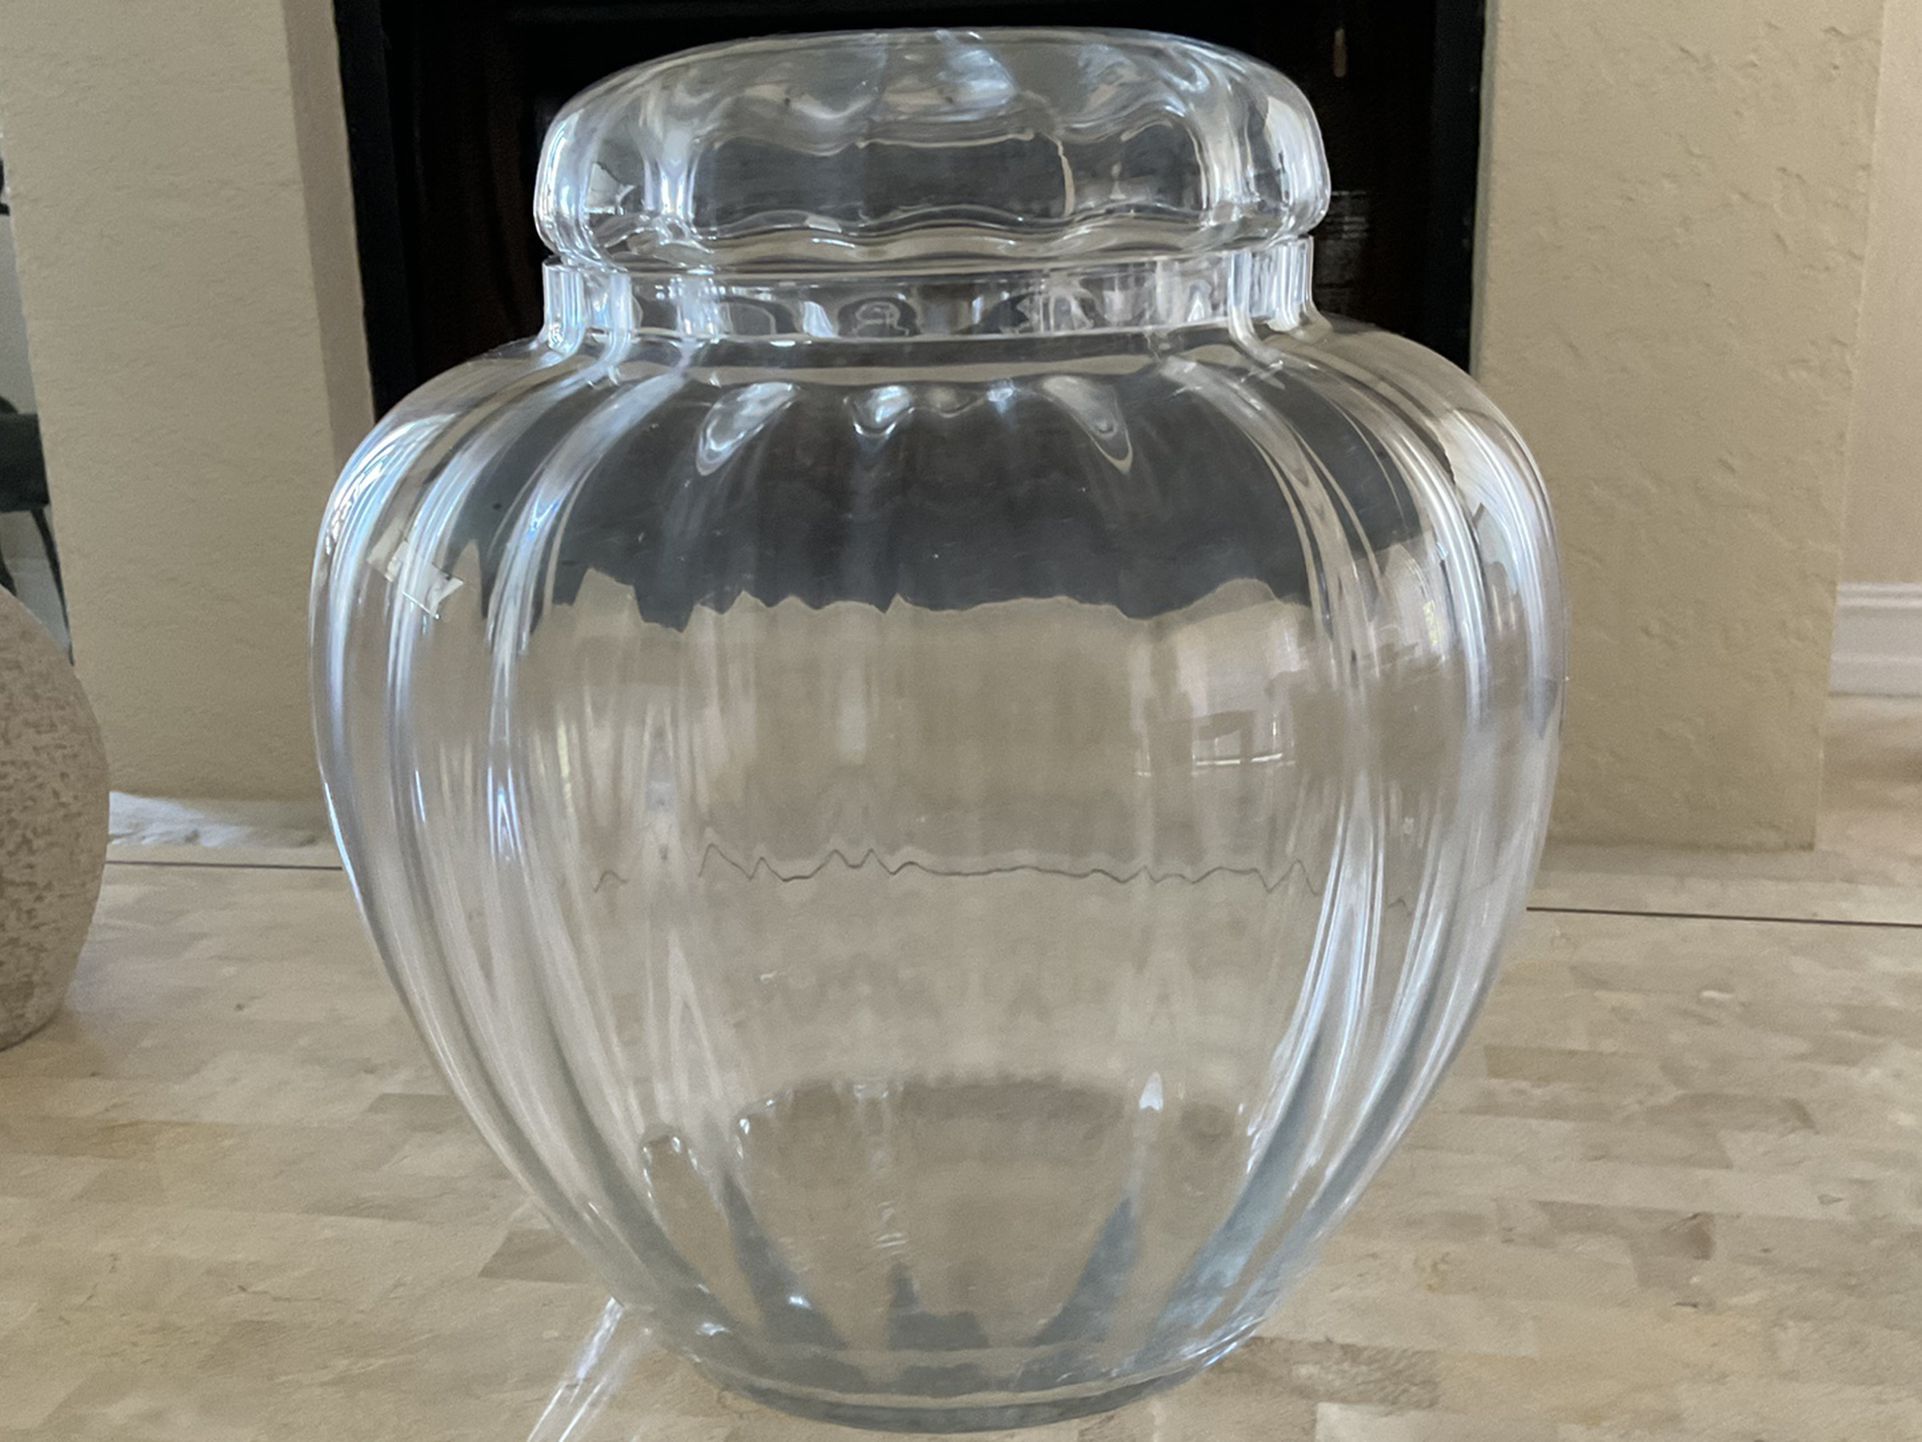 LARGE GLASS APOTHECARY JAR WITH COVER (12” DIAMETER X 13” HIGH) $25